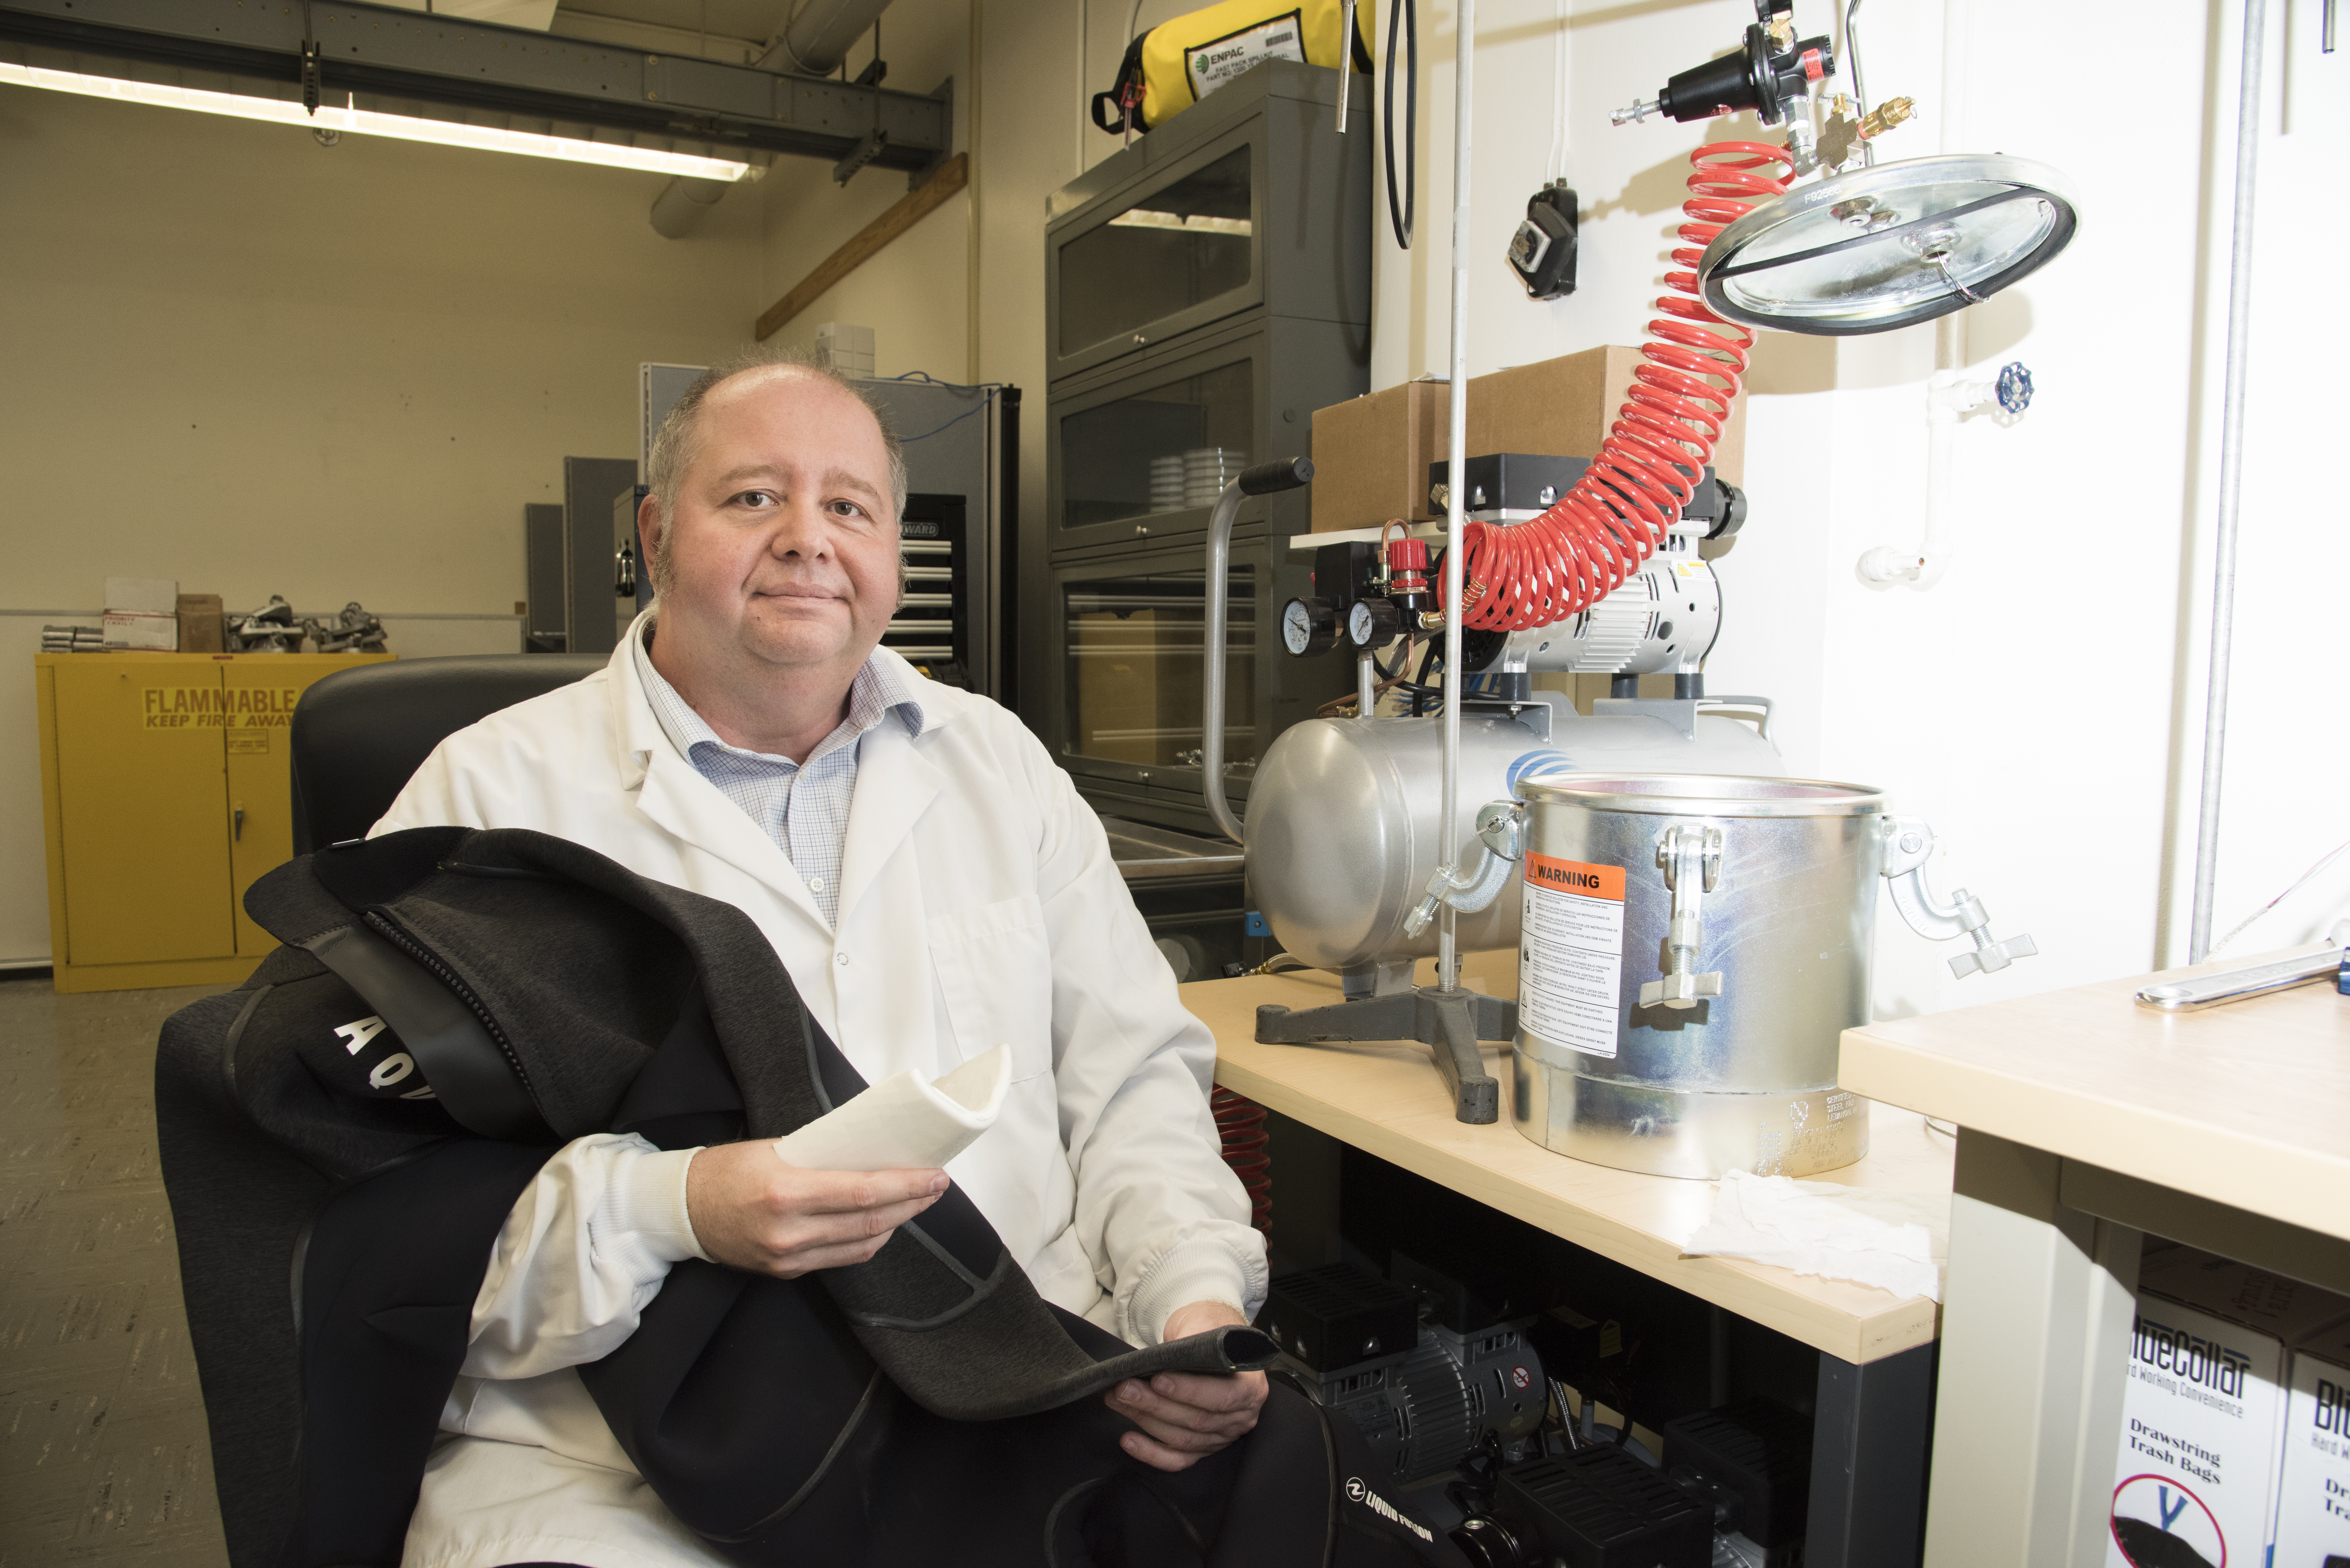 Professor Emil Kartalov seeks to improve the neoprene wet suit by revolutionizing the buoyancy factor in new materials he is currently testing at NPS.